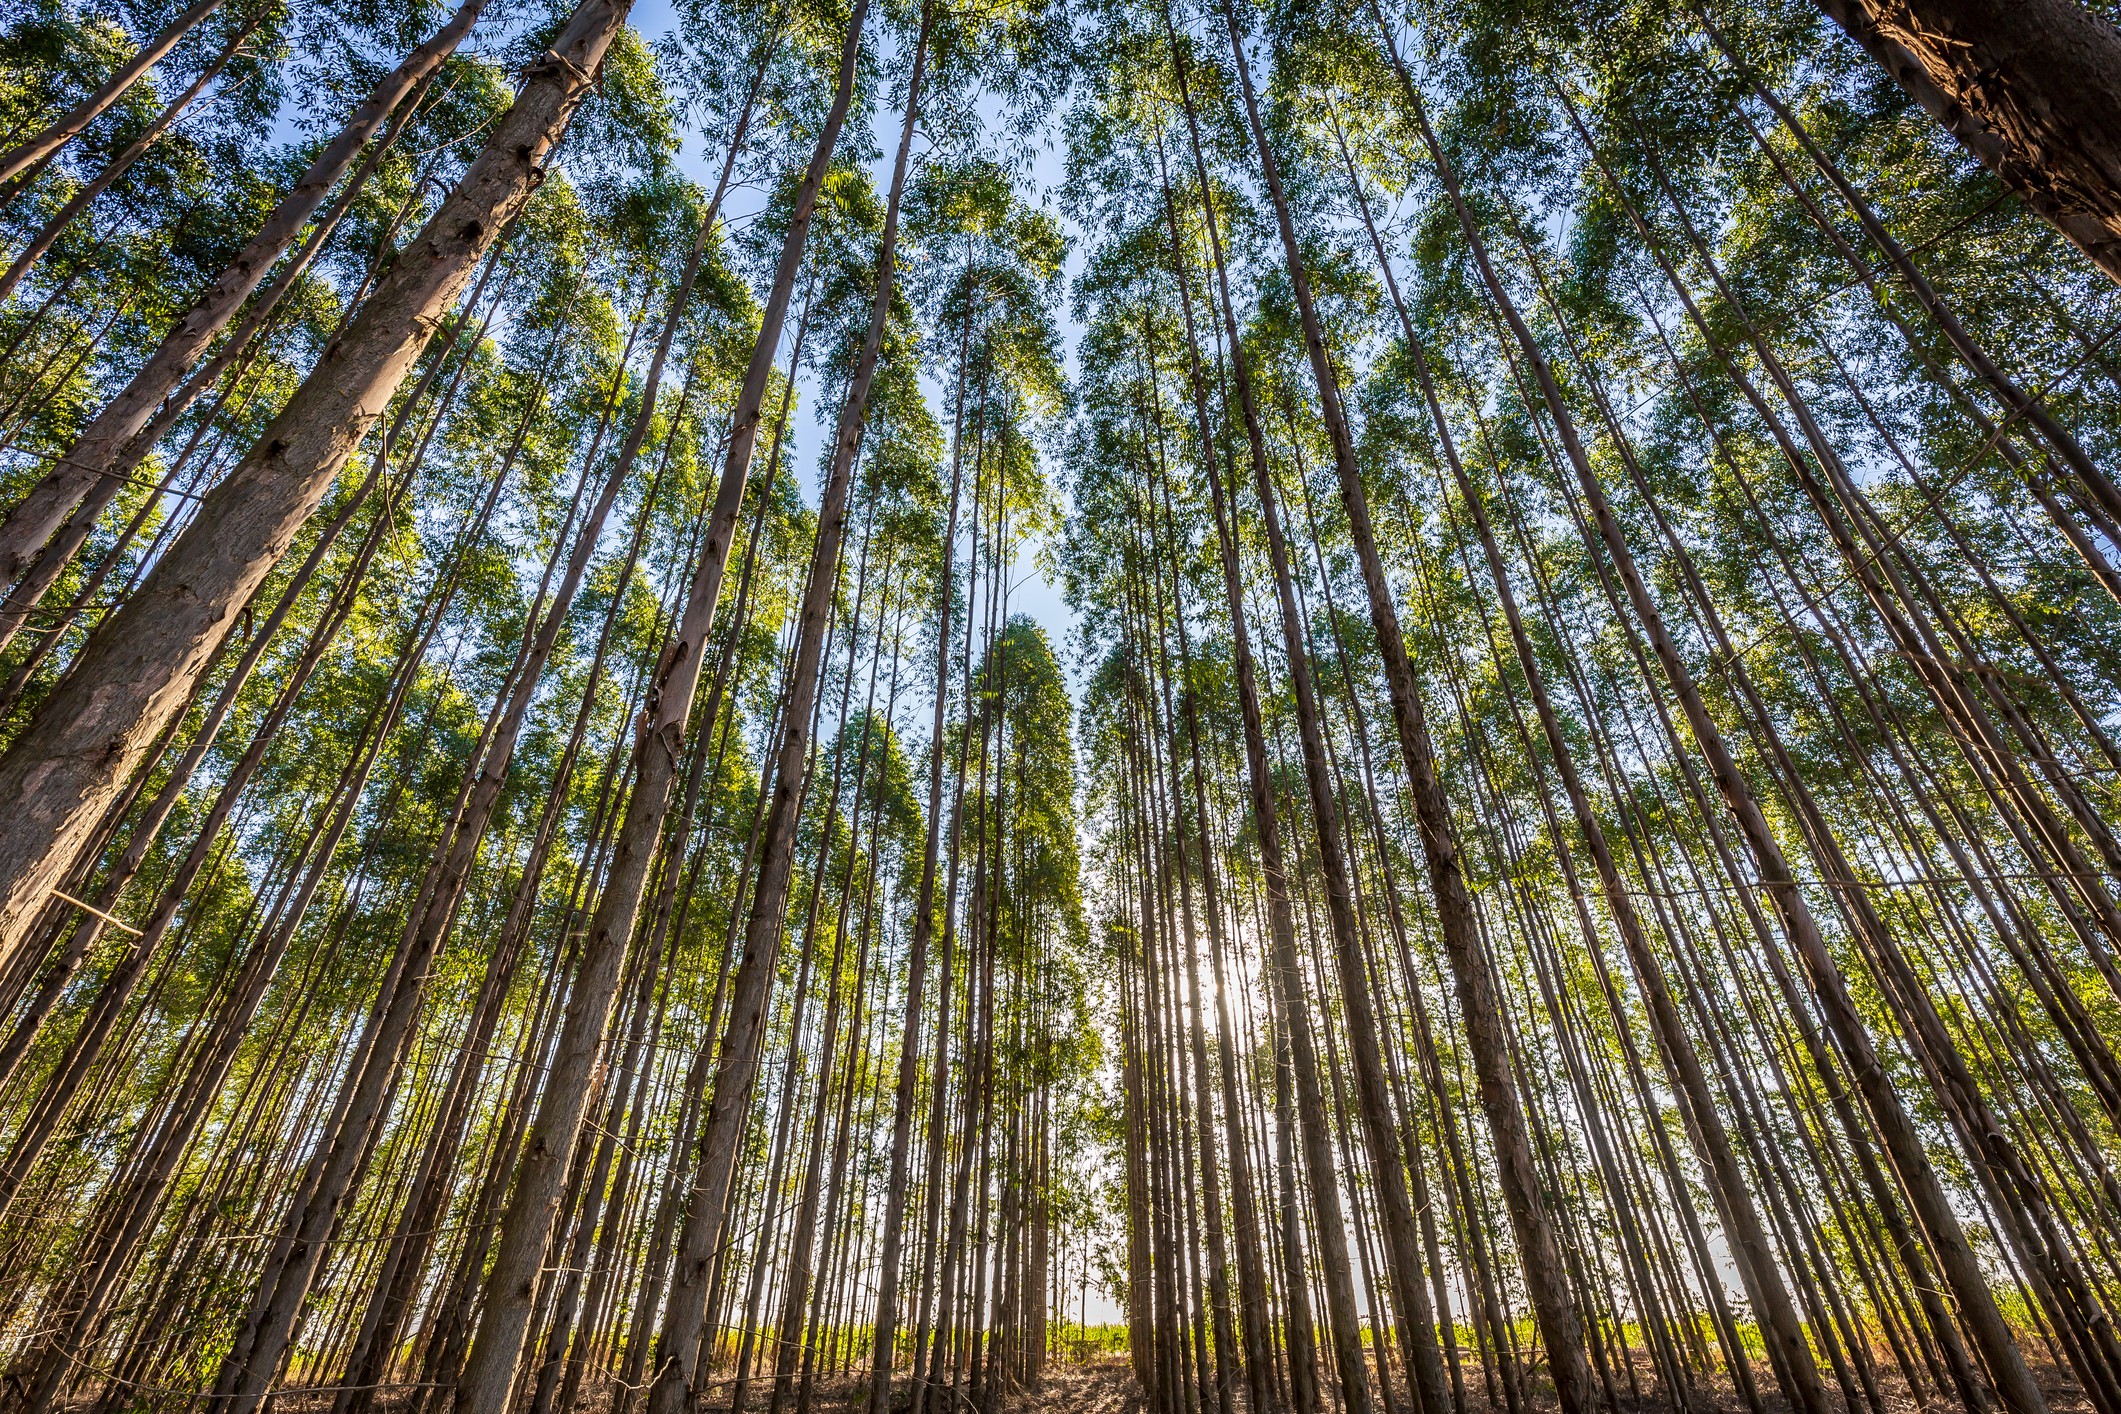 Eucalyptus plantation for wood Industry in Brazil's countryside.